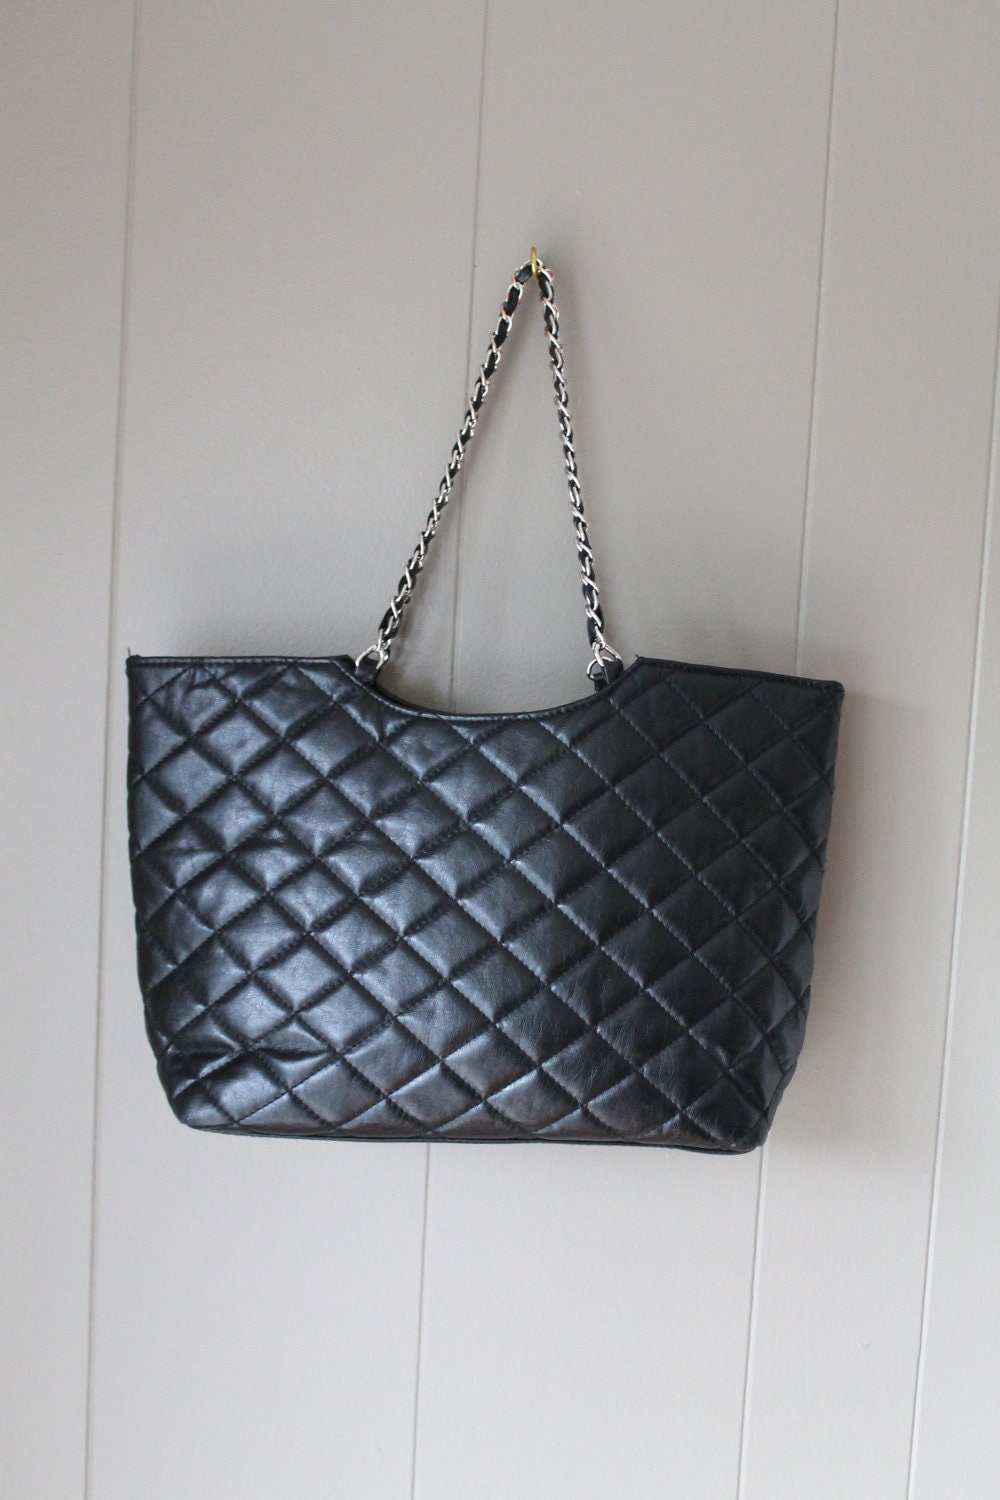 Black Handbag with Chain handle /Large Quilted 90s Purse